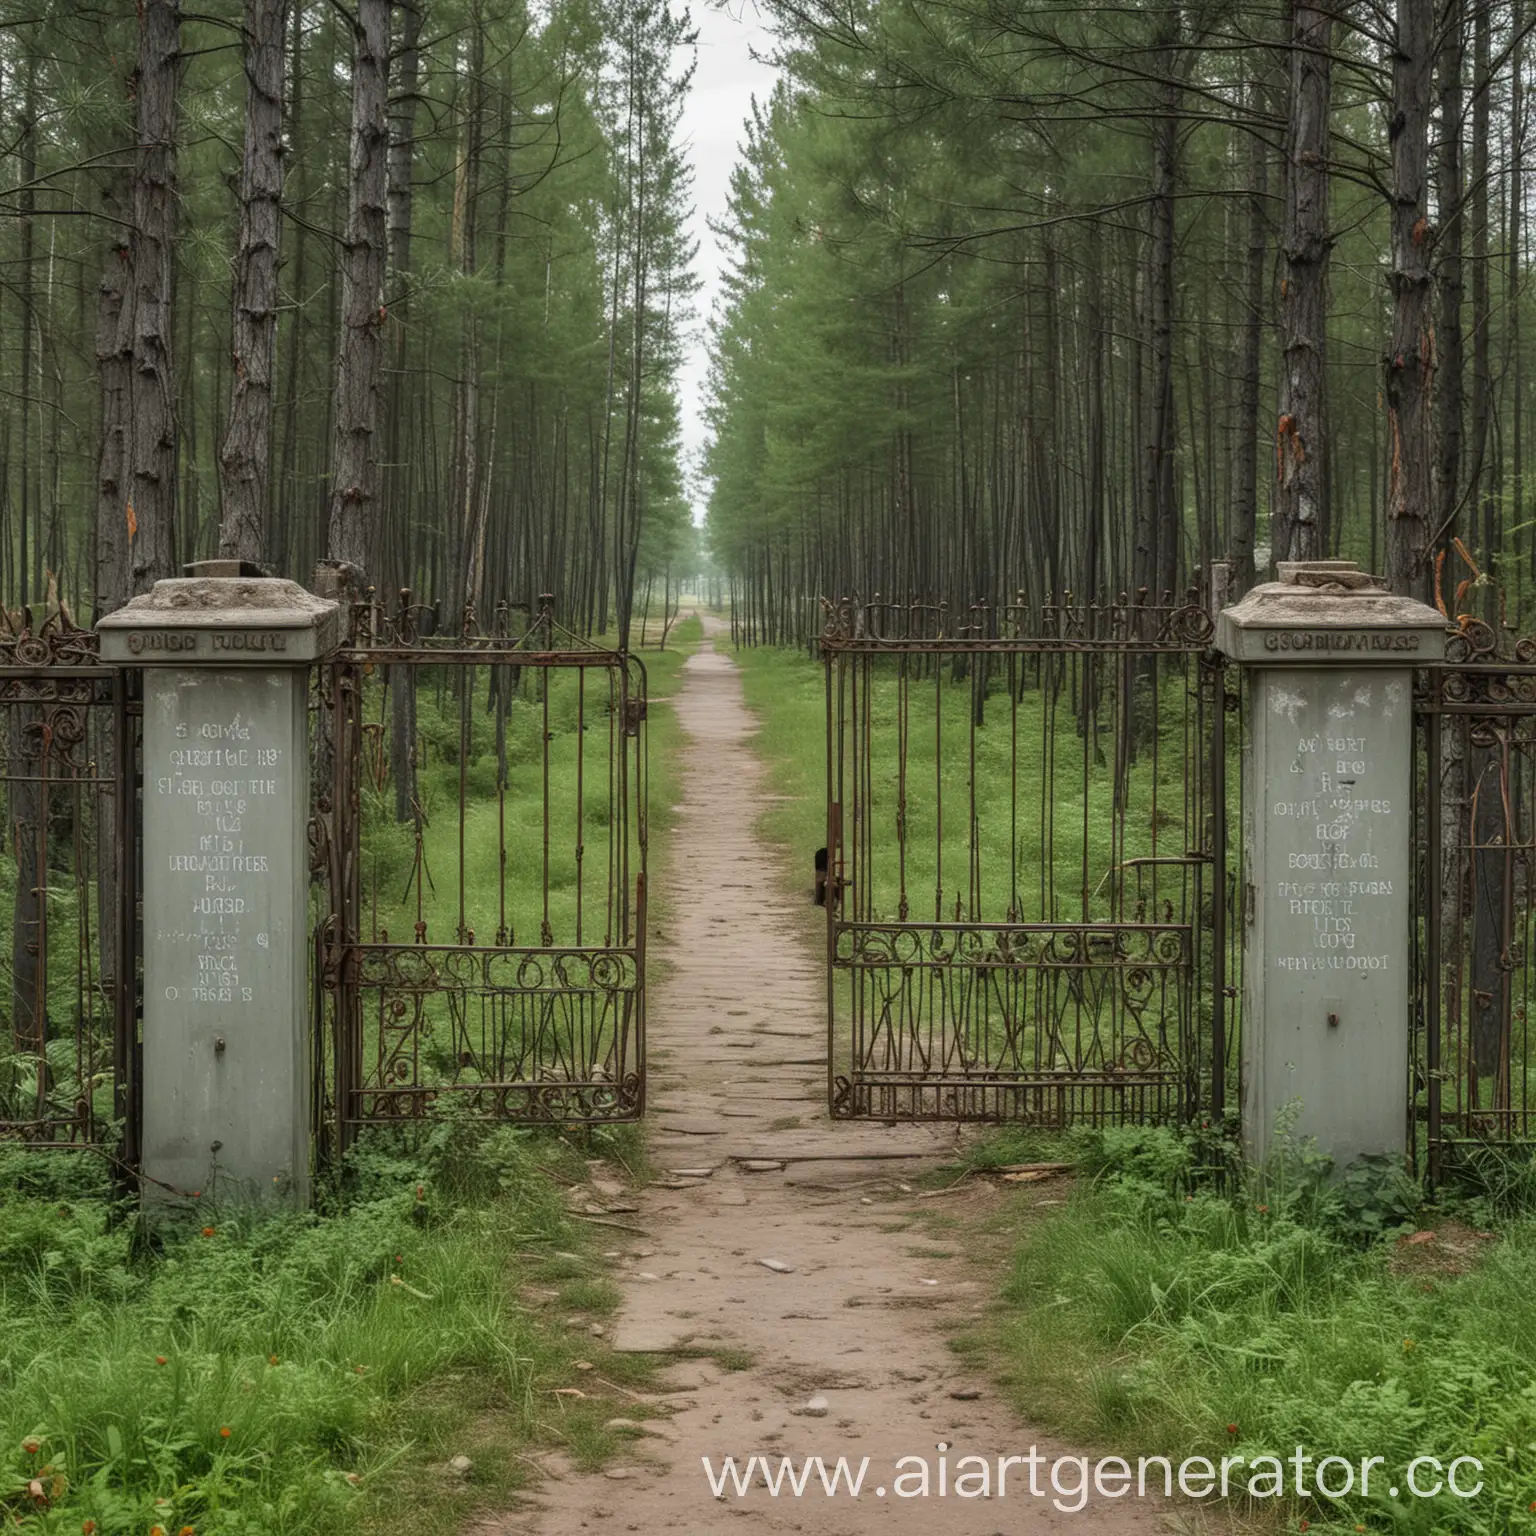 Soviet-Forest-Headquarters-Rustic-Iron-Gates-in-Overgrown-Pine-Forest